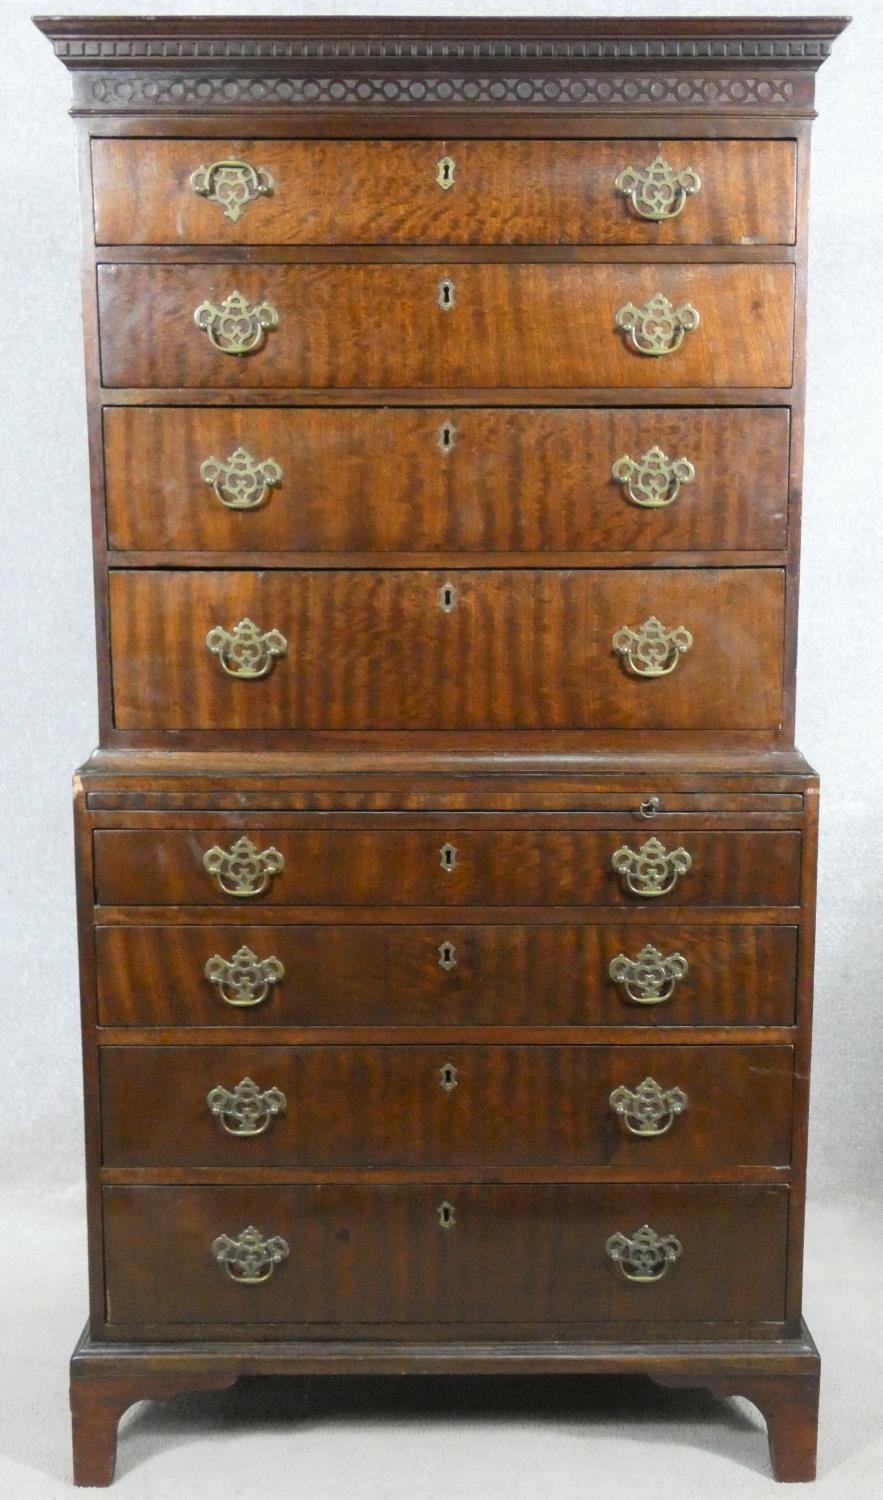 A Georgian mahogany chest on chest with blind fret cut and dentil moulded cornice above eight